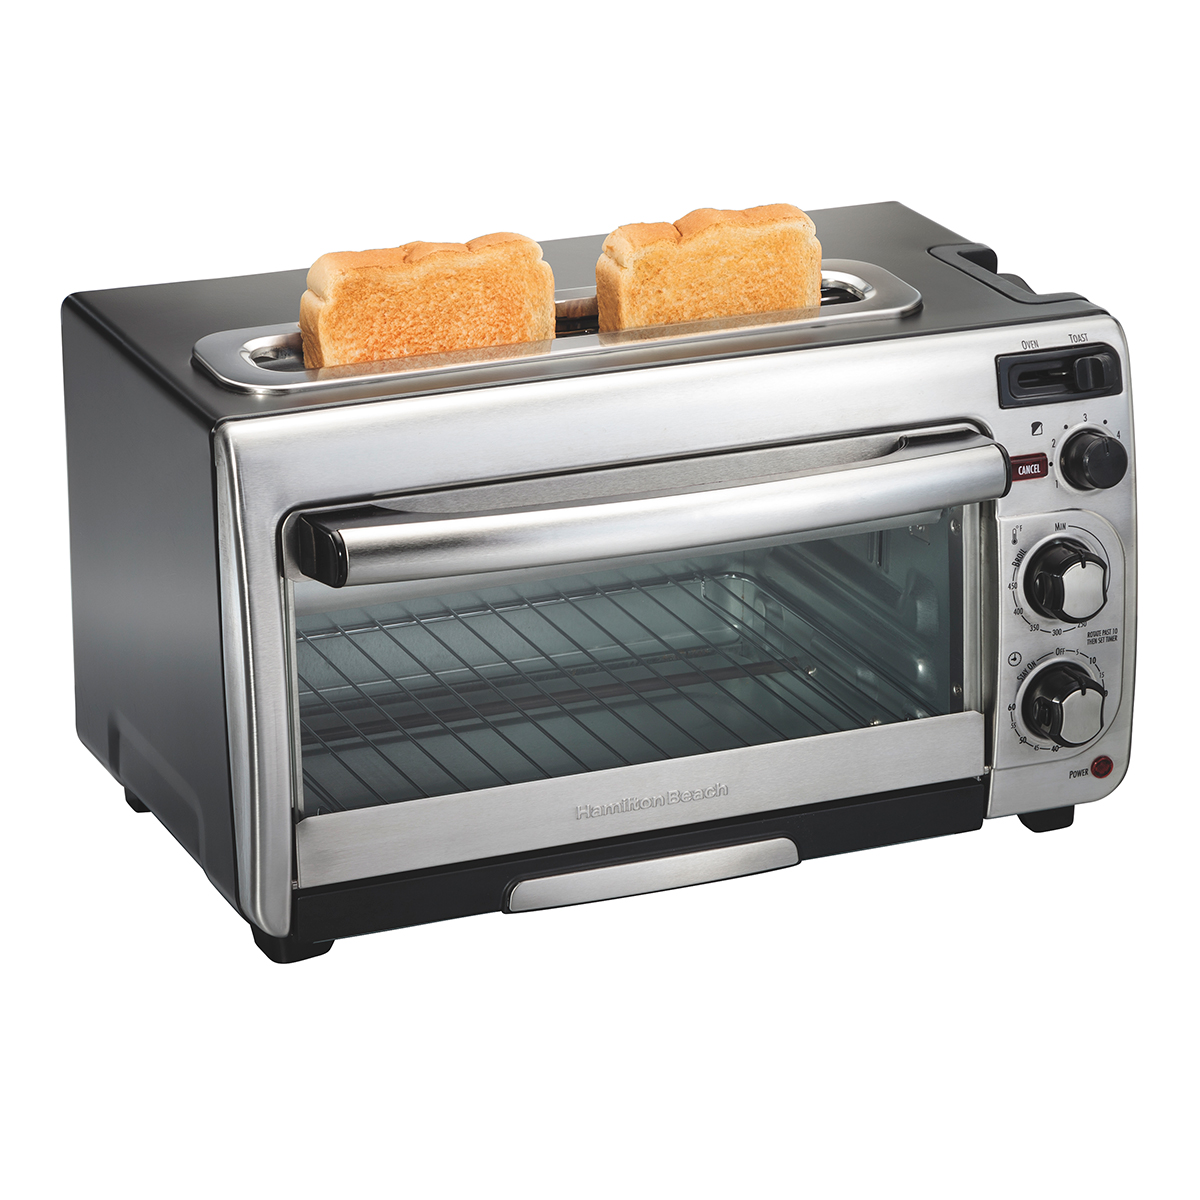 2-in-1 Oven and Toaster (31156)